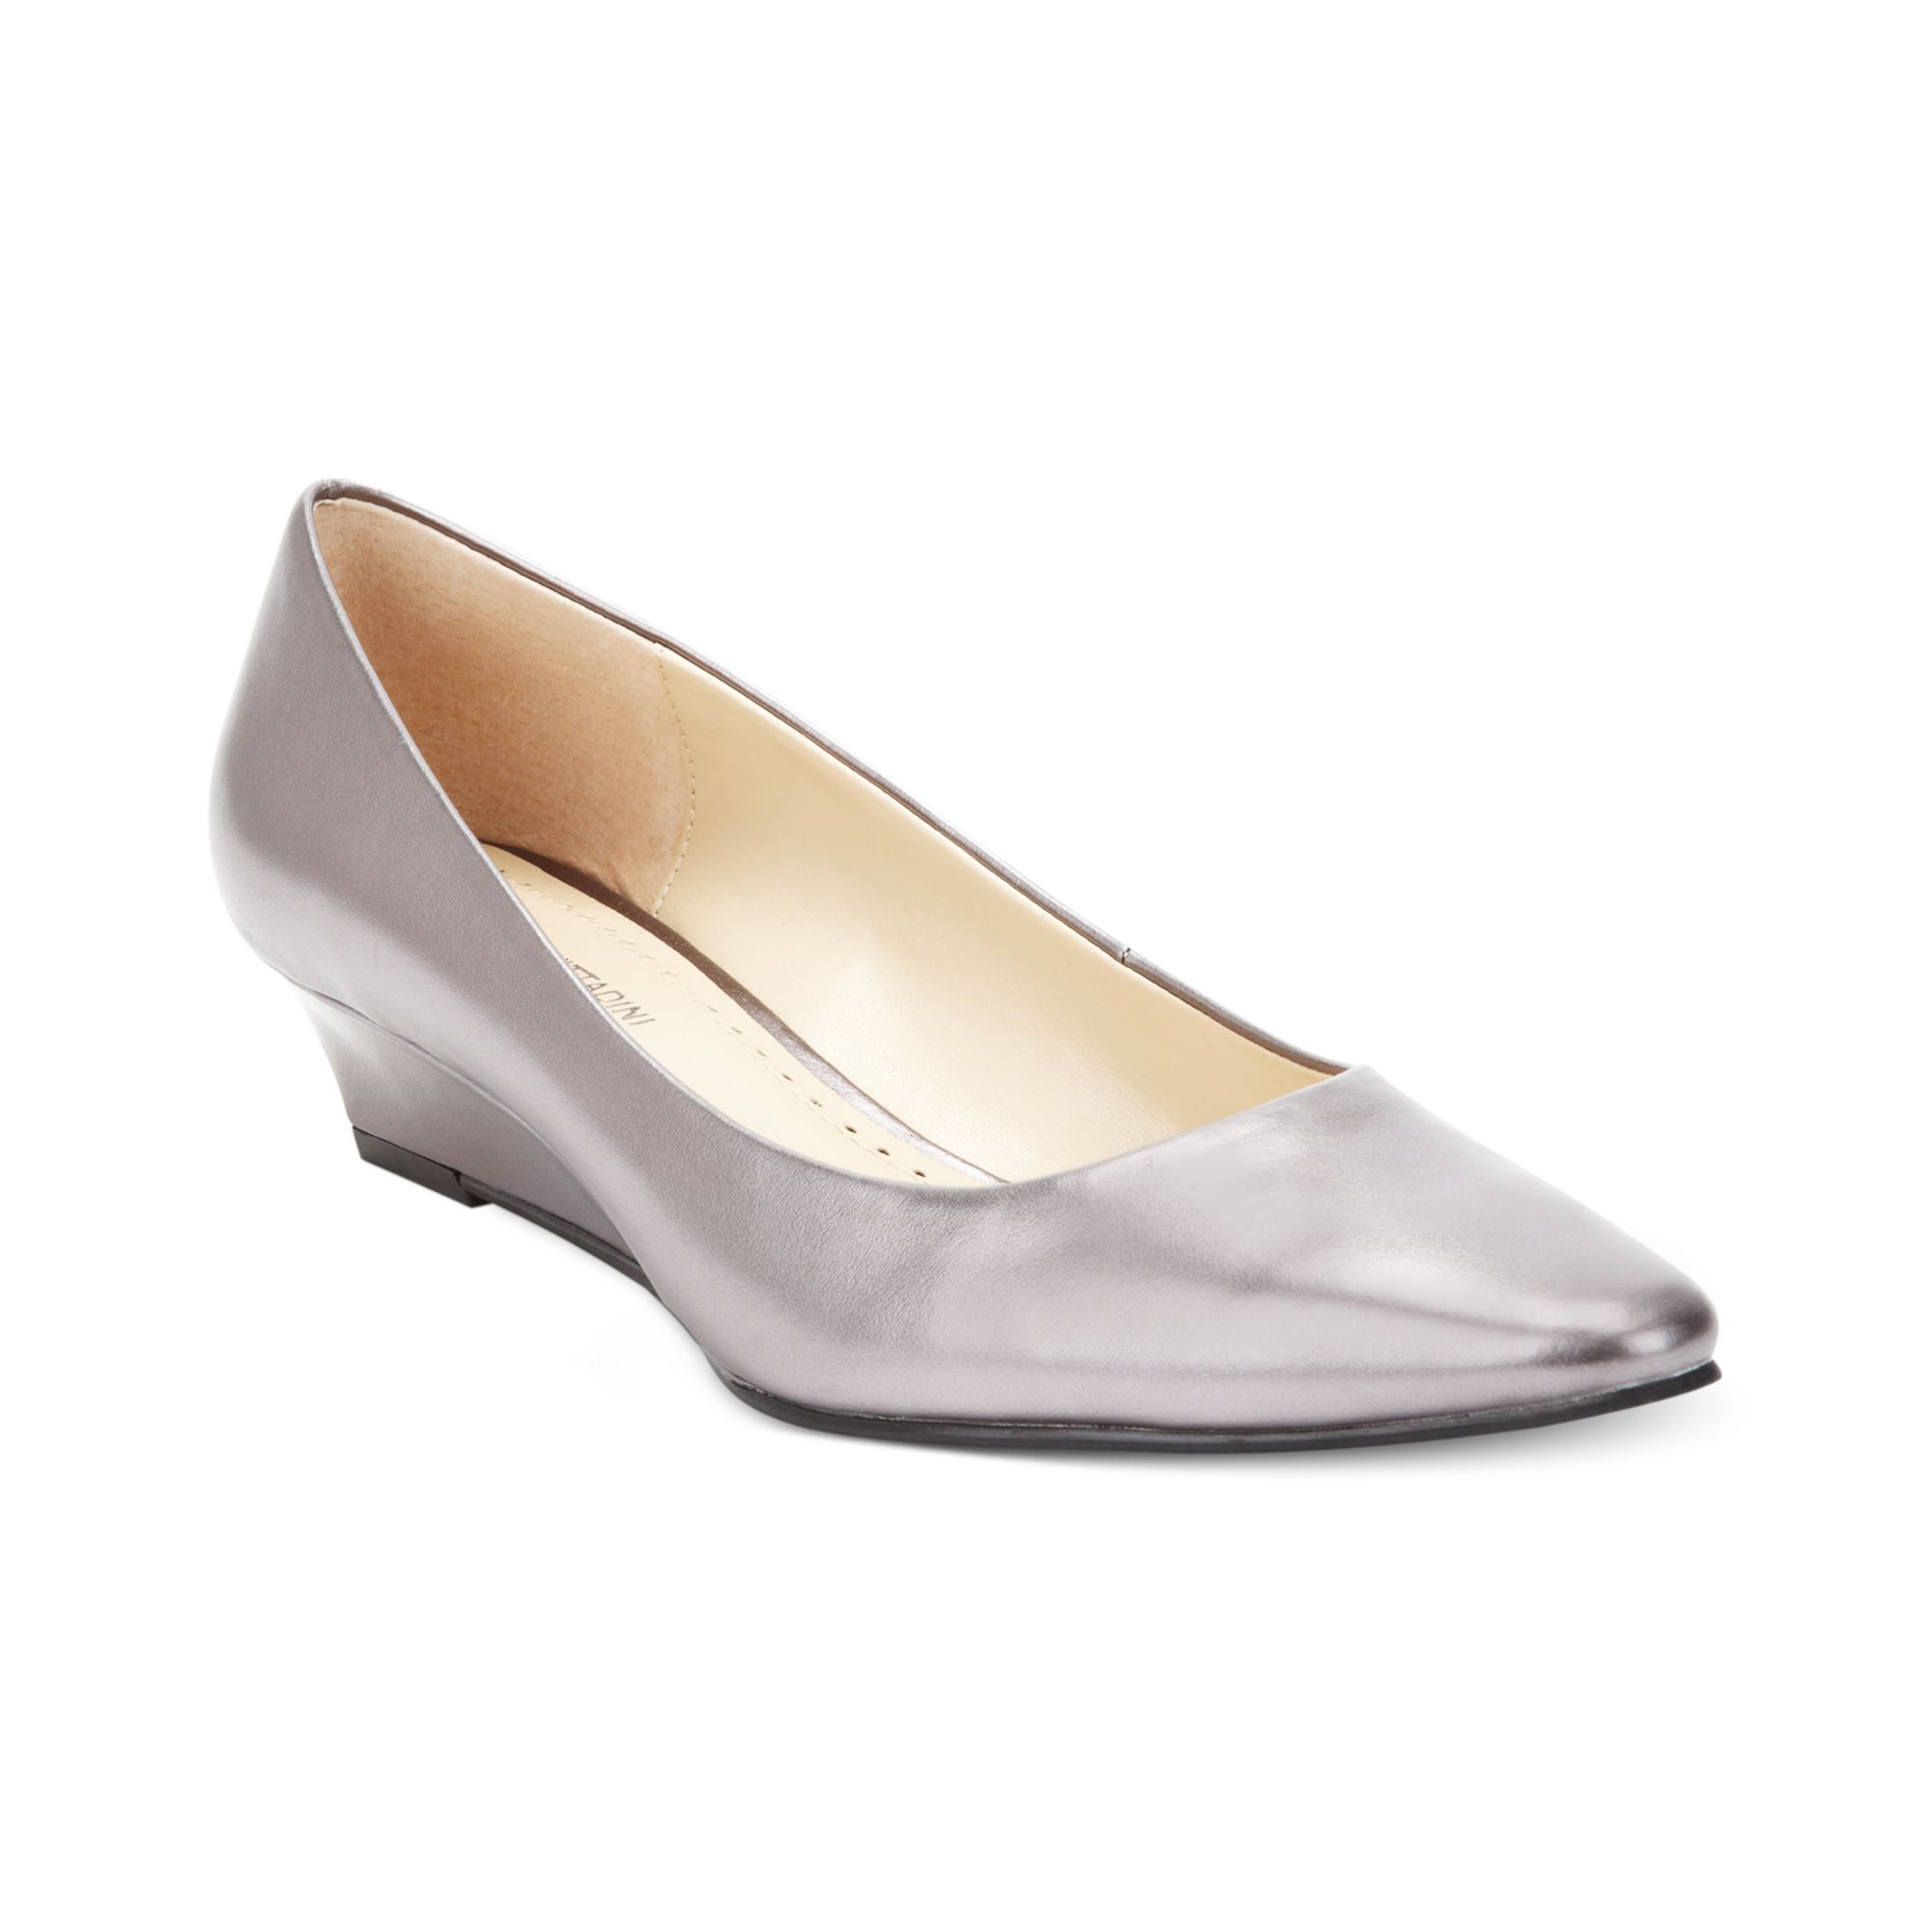 Adrienne Vittadini Prince Wedges in Silver (PEWTER METALLIC) | Lyst